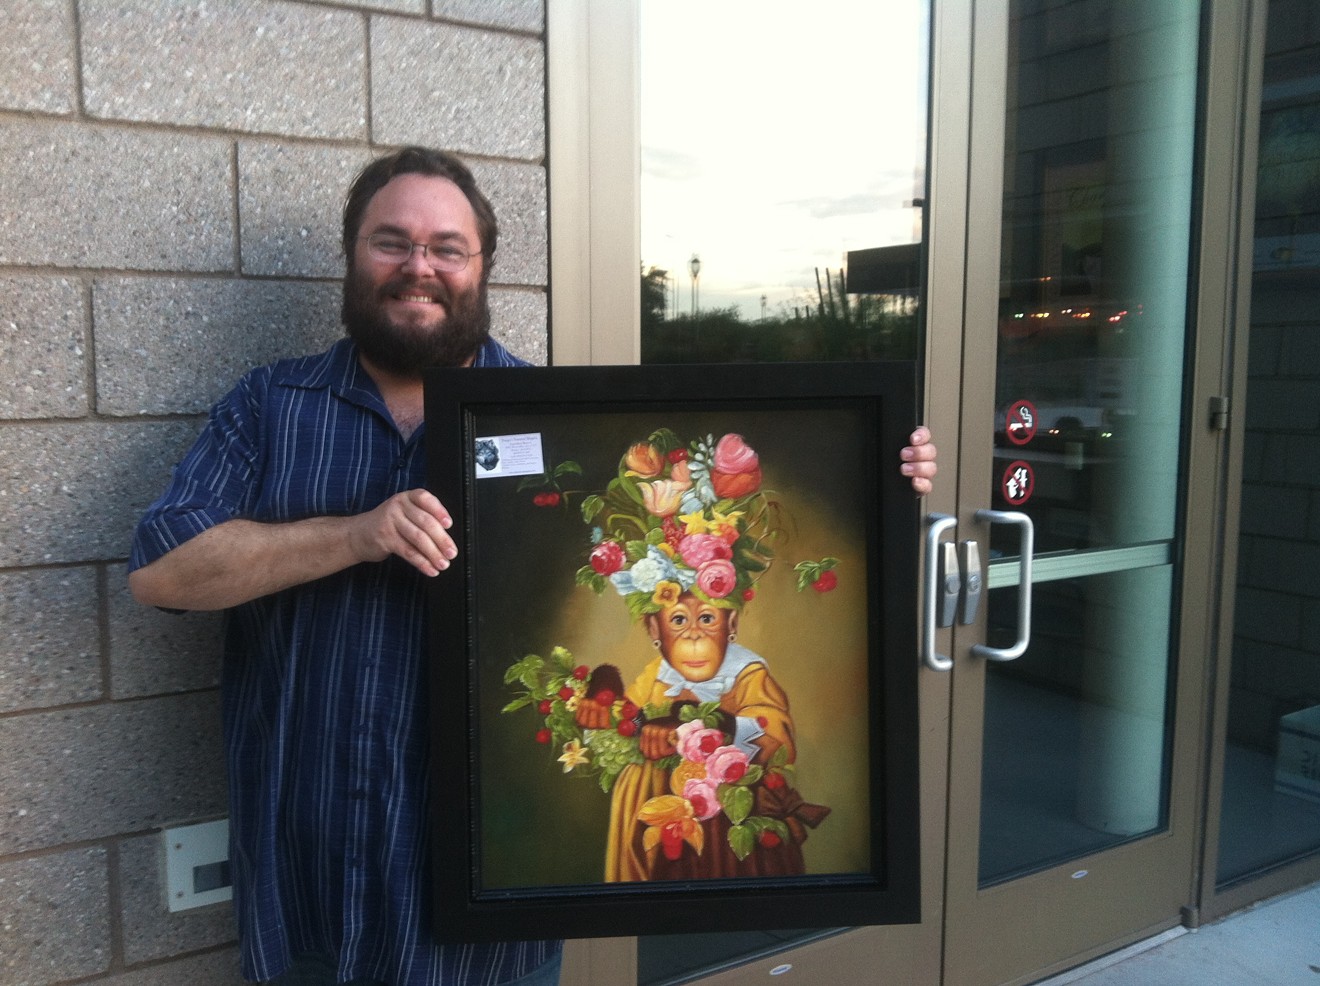 Kerry Lengel with artwork by Donald Roller Wilson for a 2015 silent auction in Peoria.